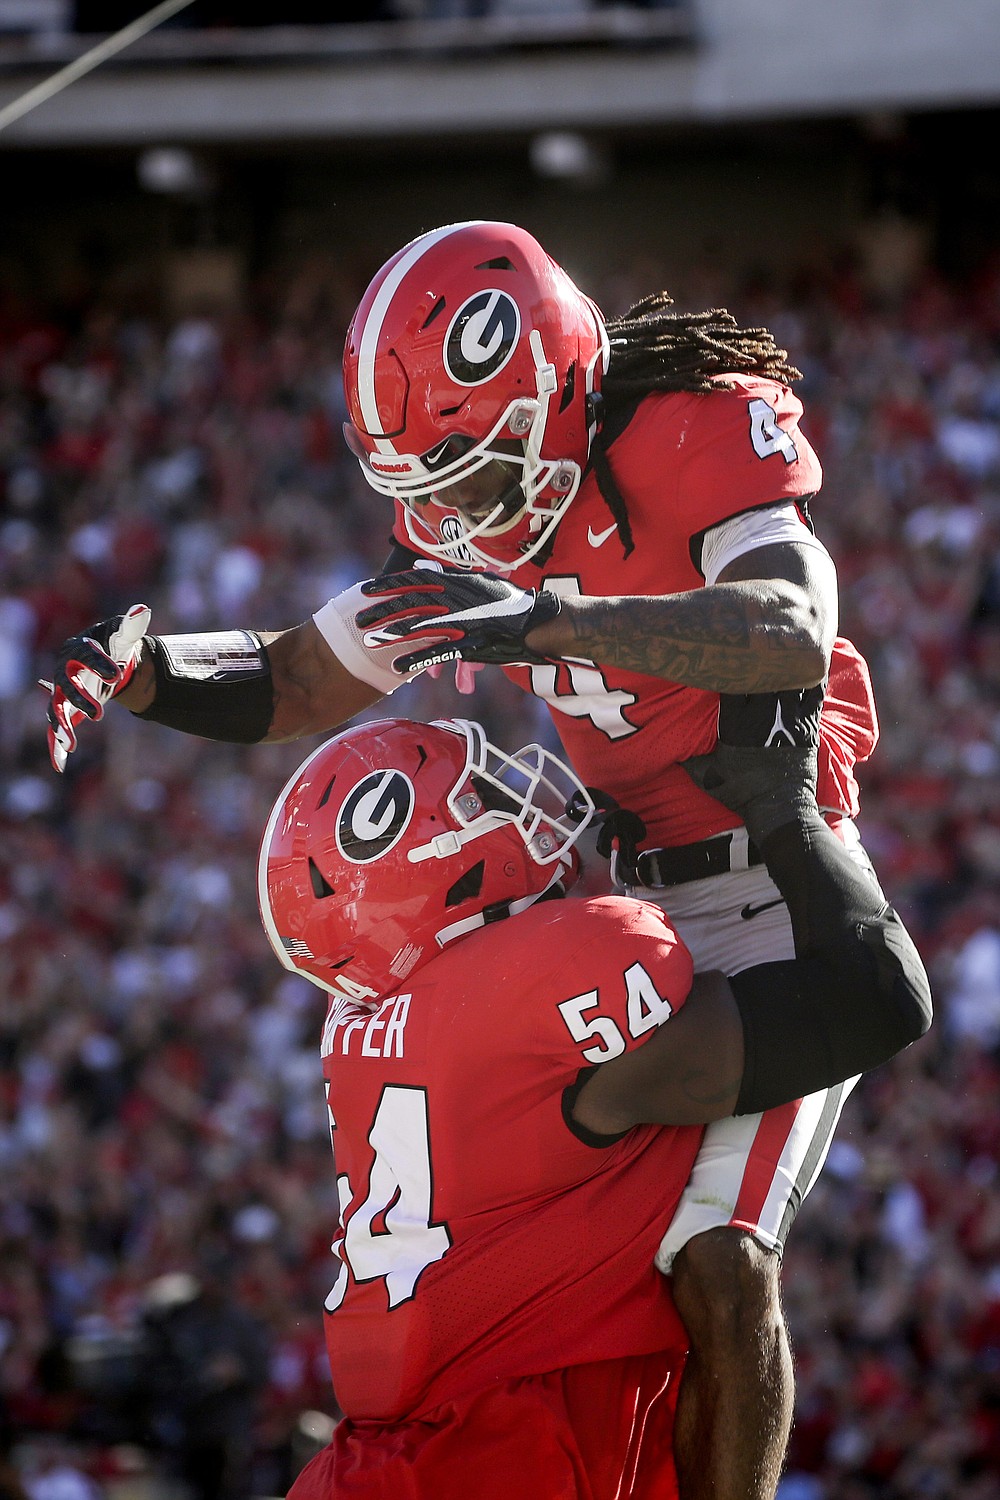 Georgia running back James Cook (4) celebrates with offensive lineman Justin Shaffer (54) after a touchdown against Kentucky during the first half of an NCAA college football game, Saturday, Oct. 16, 2021 in Athens, Ga. (AP Photo/Butch Dill)